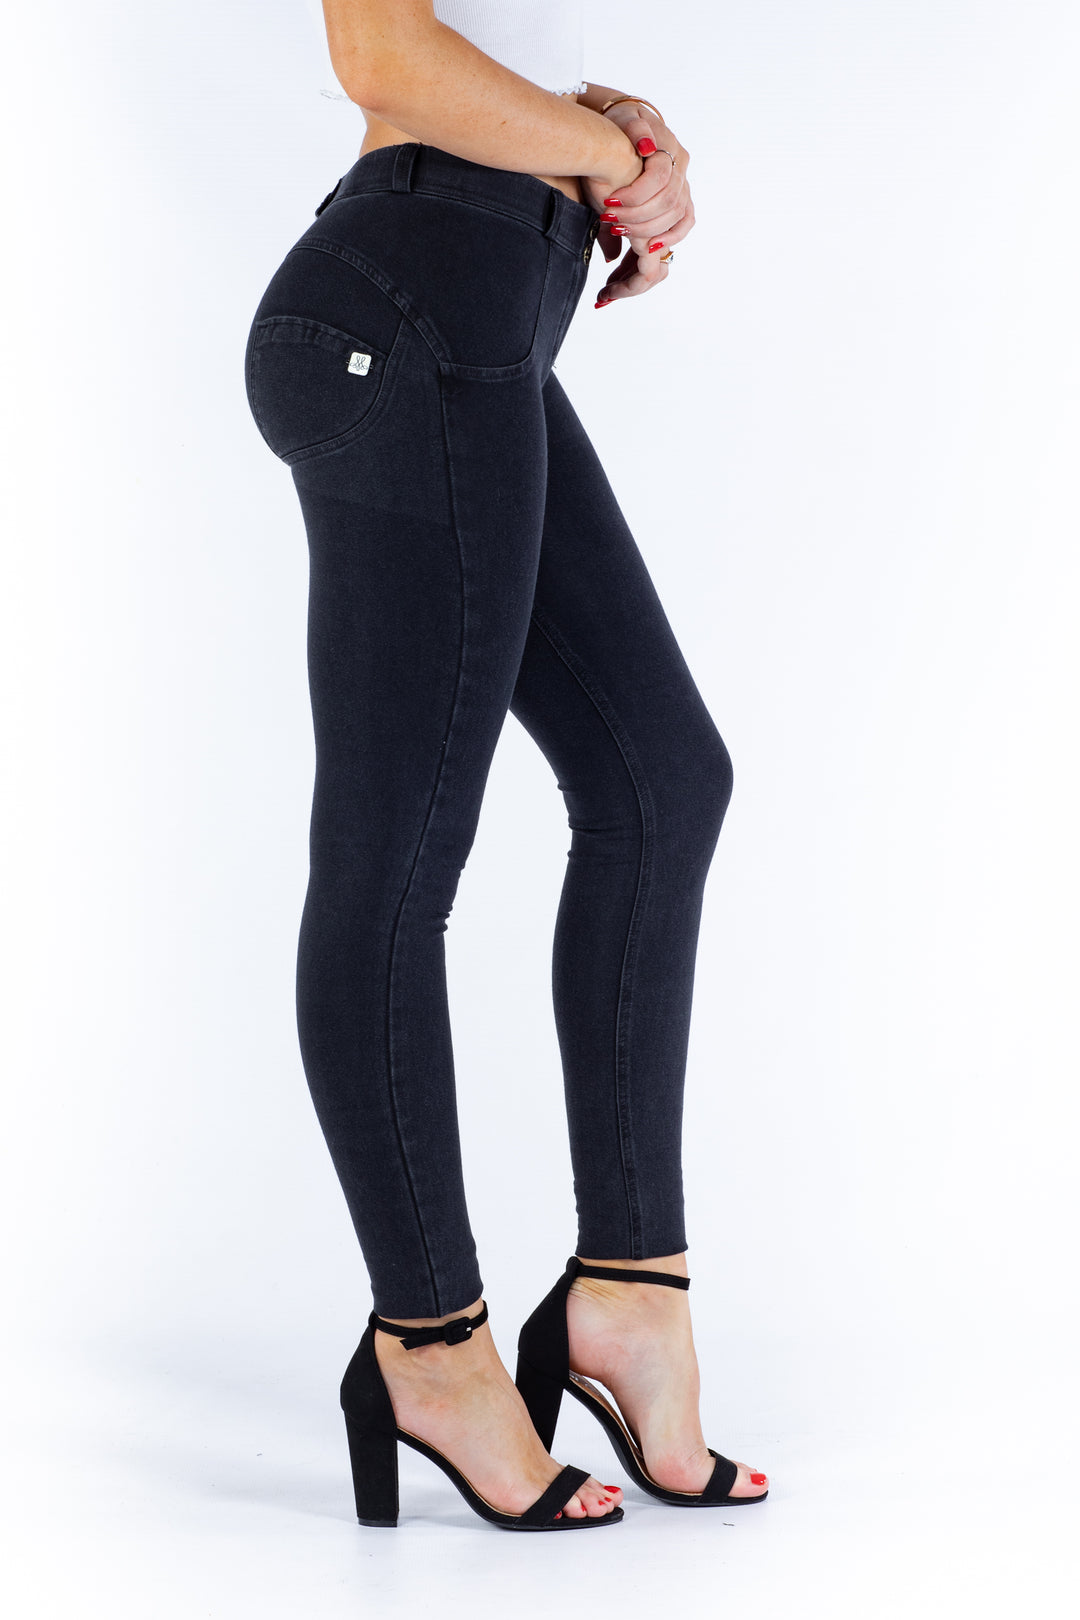 Mid waist Butt lifting Shaping Jeans/Jeggings - Black washaos-init aos-animate